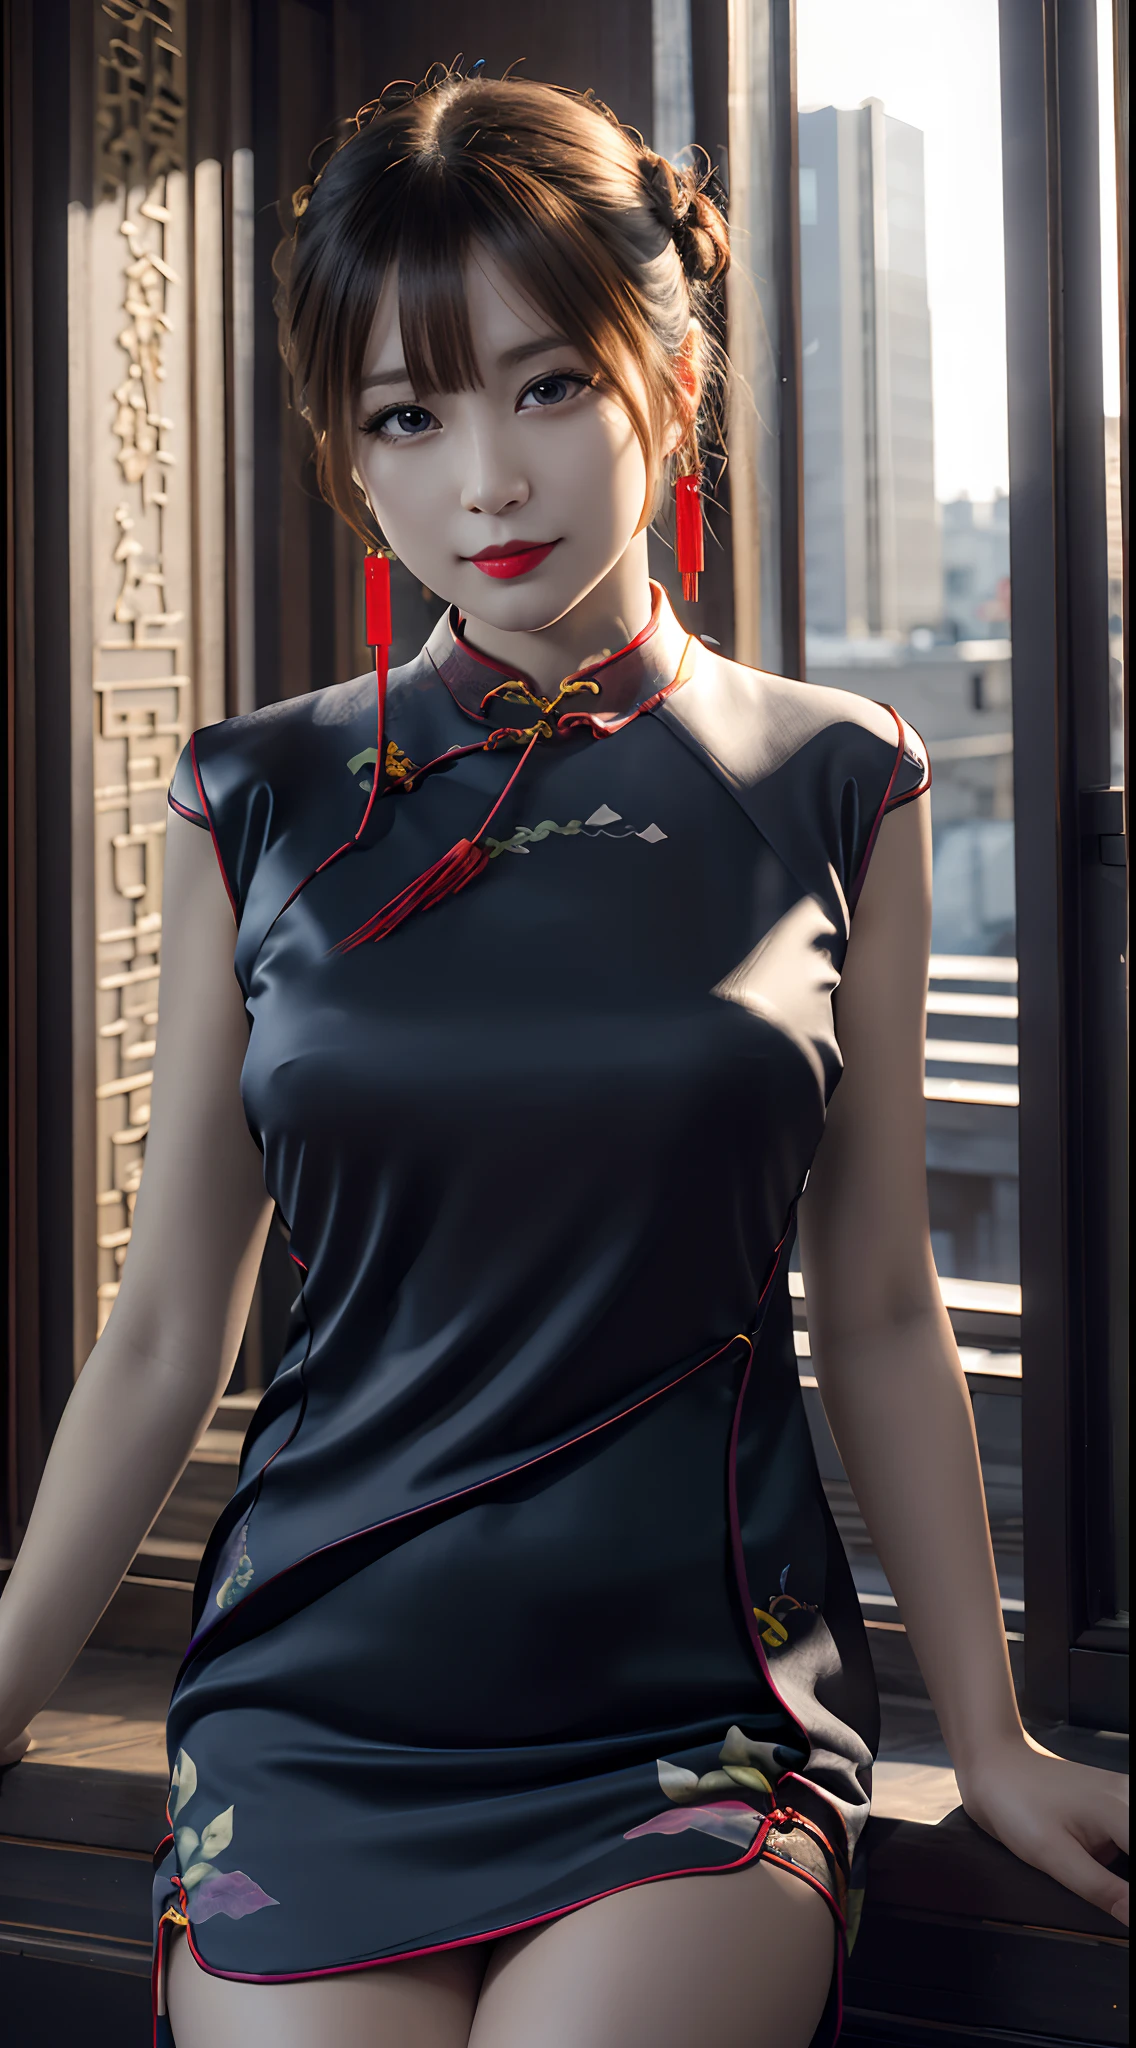 (8K, Raw photo, Best Quality, masutepiece:1.2), (Realistic, Photorealsitic:1.37),1girl in, Professional Lighting, Photon mapping, Radio City, Raw photo、(Photorealsitic:1.4)、Octane number renderin、Complex 3D rendering ultra detail, Studio Soft Light, Rim Lights, vibrant detail, super detailing, realistic skin textures, Detail Face, Beautiful detail eyes, Very detailed CG Unity 16k wallpaper, make - up, (detailedbackground:1.2),Colossal 、Best Quality, 超A high resolution, masutepiece, 1girl in, 20yr old, Black hair,((Cheongsam:1.5)), cute  face, good,Temple background、Nogizaka Idol、Korean Idol、Japan idle